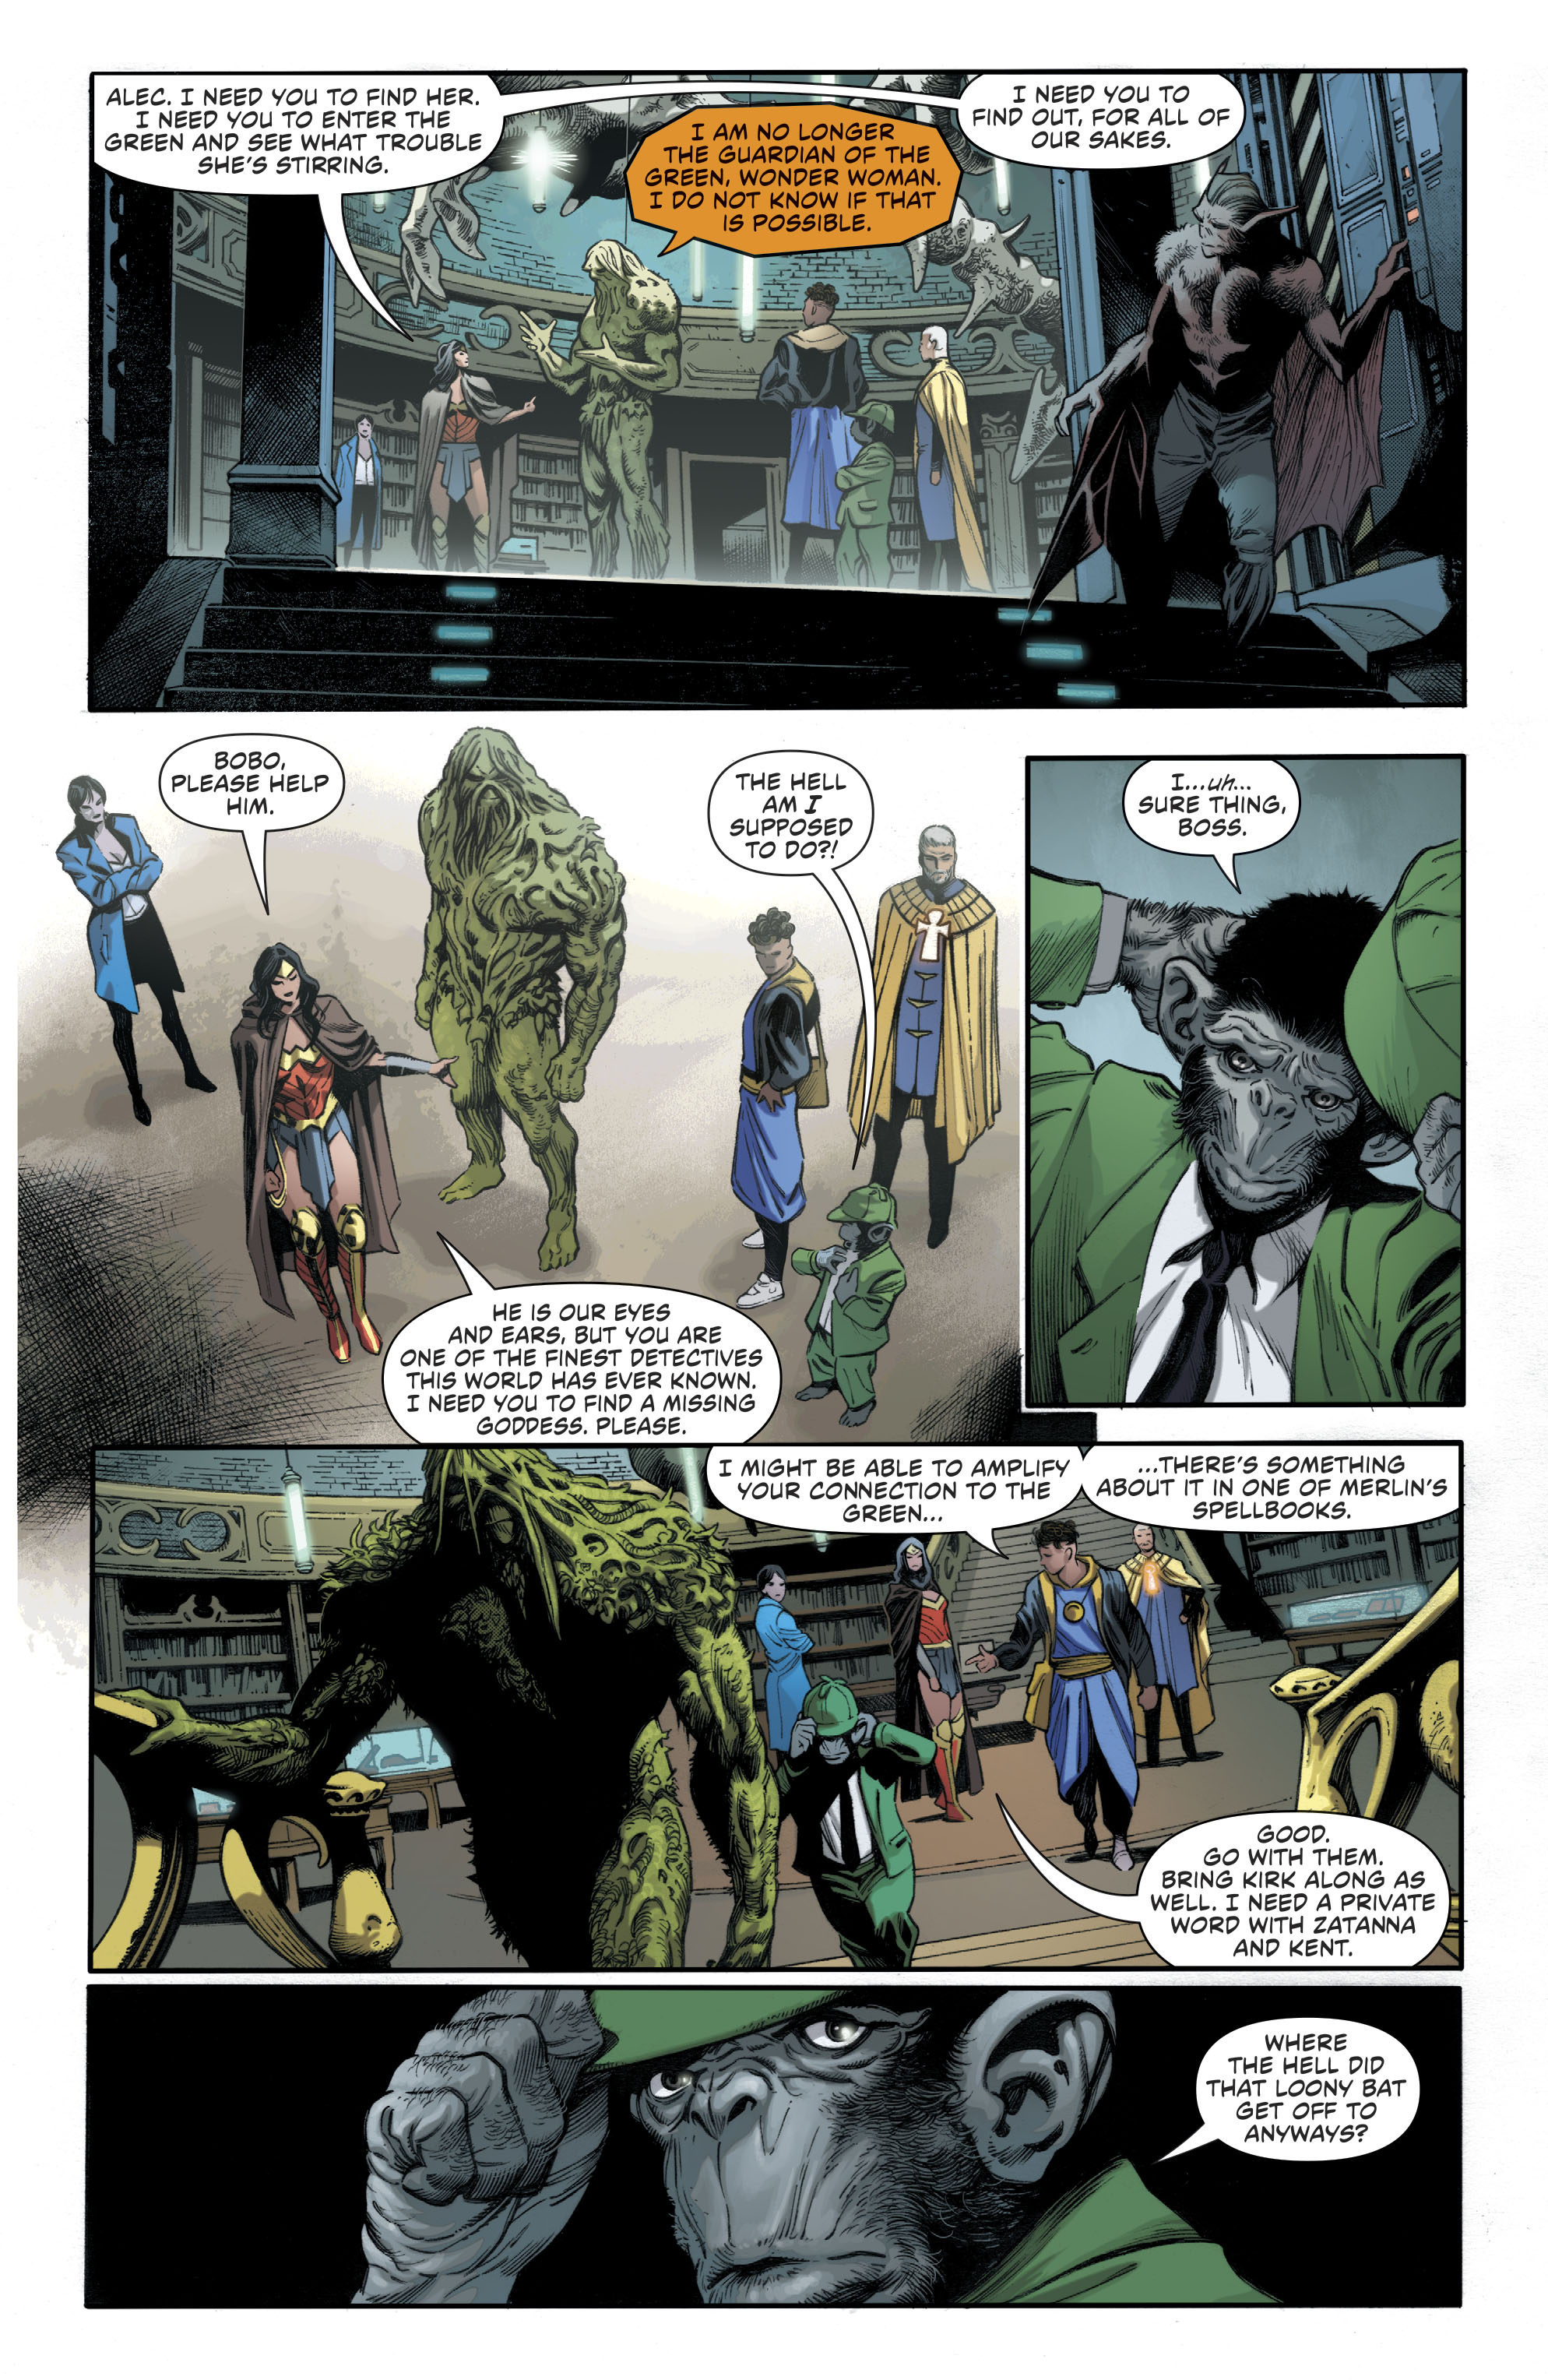 Justice League Dark (2018-): Chapter 15 - Page 5